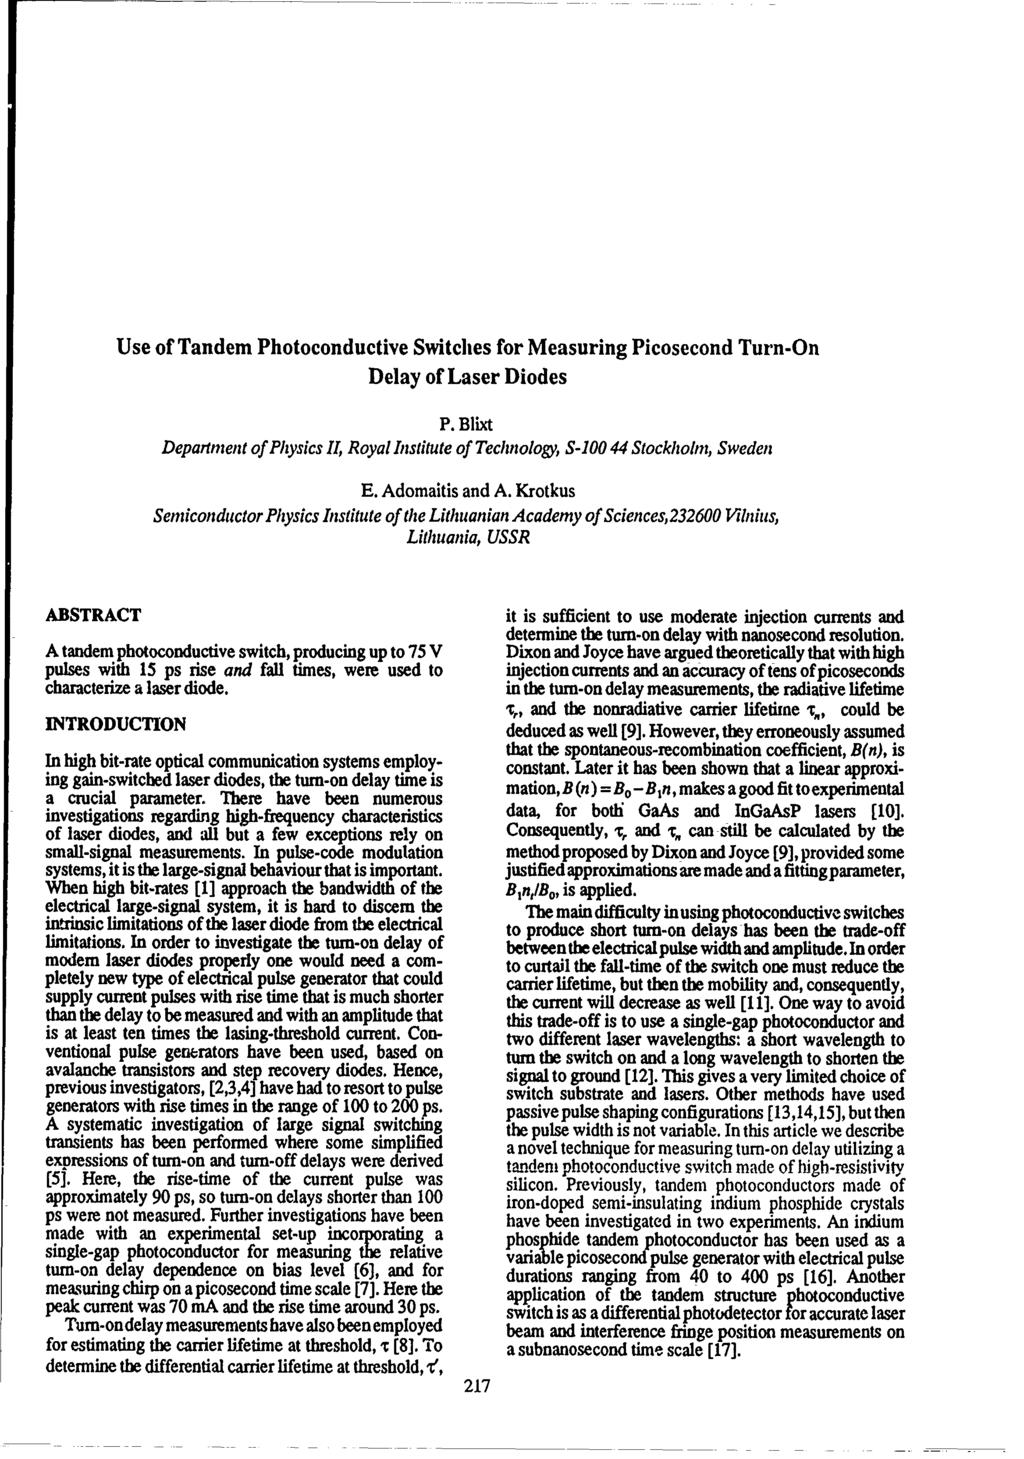 Use of Tandem Photoconductive Switches for Measuring Picosecond Turn-On Delay of Laser Diodes P. Blixt Department of Physics II, Royal Institute of Technology, S-100 44 Stockholm, Sweden E.